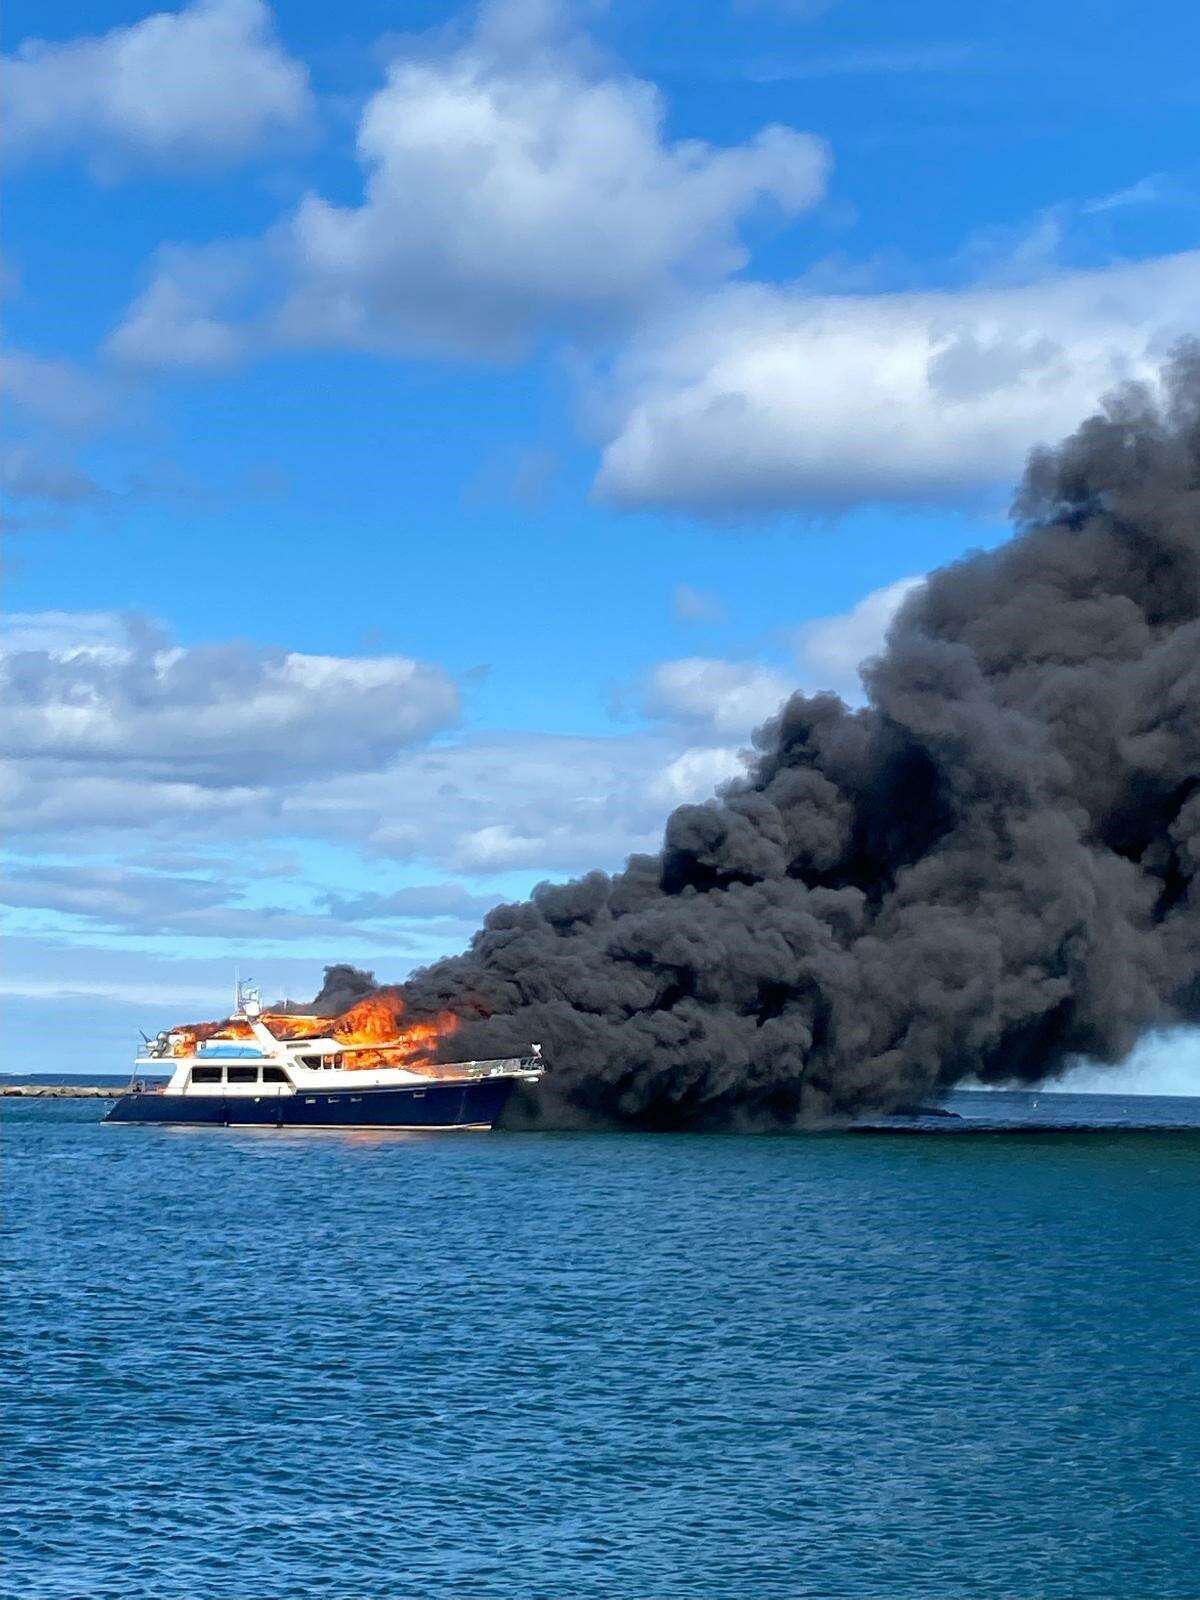 The U.S. Coast Guard posted this photo of a 70-foot-yach, the Elusive, after it caught fire on June 18 in New Hampshire.